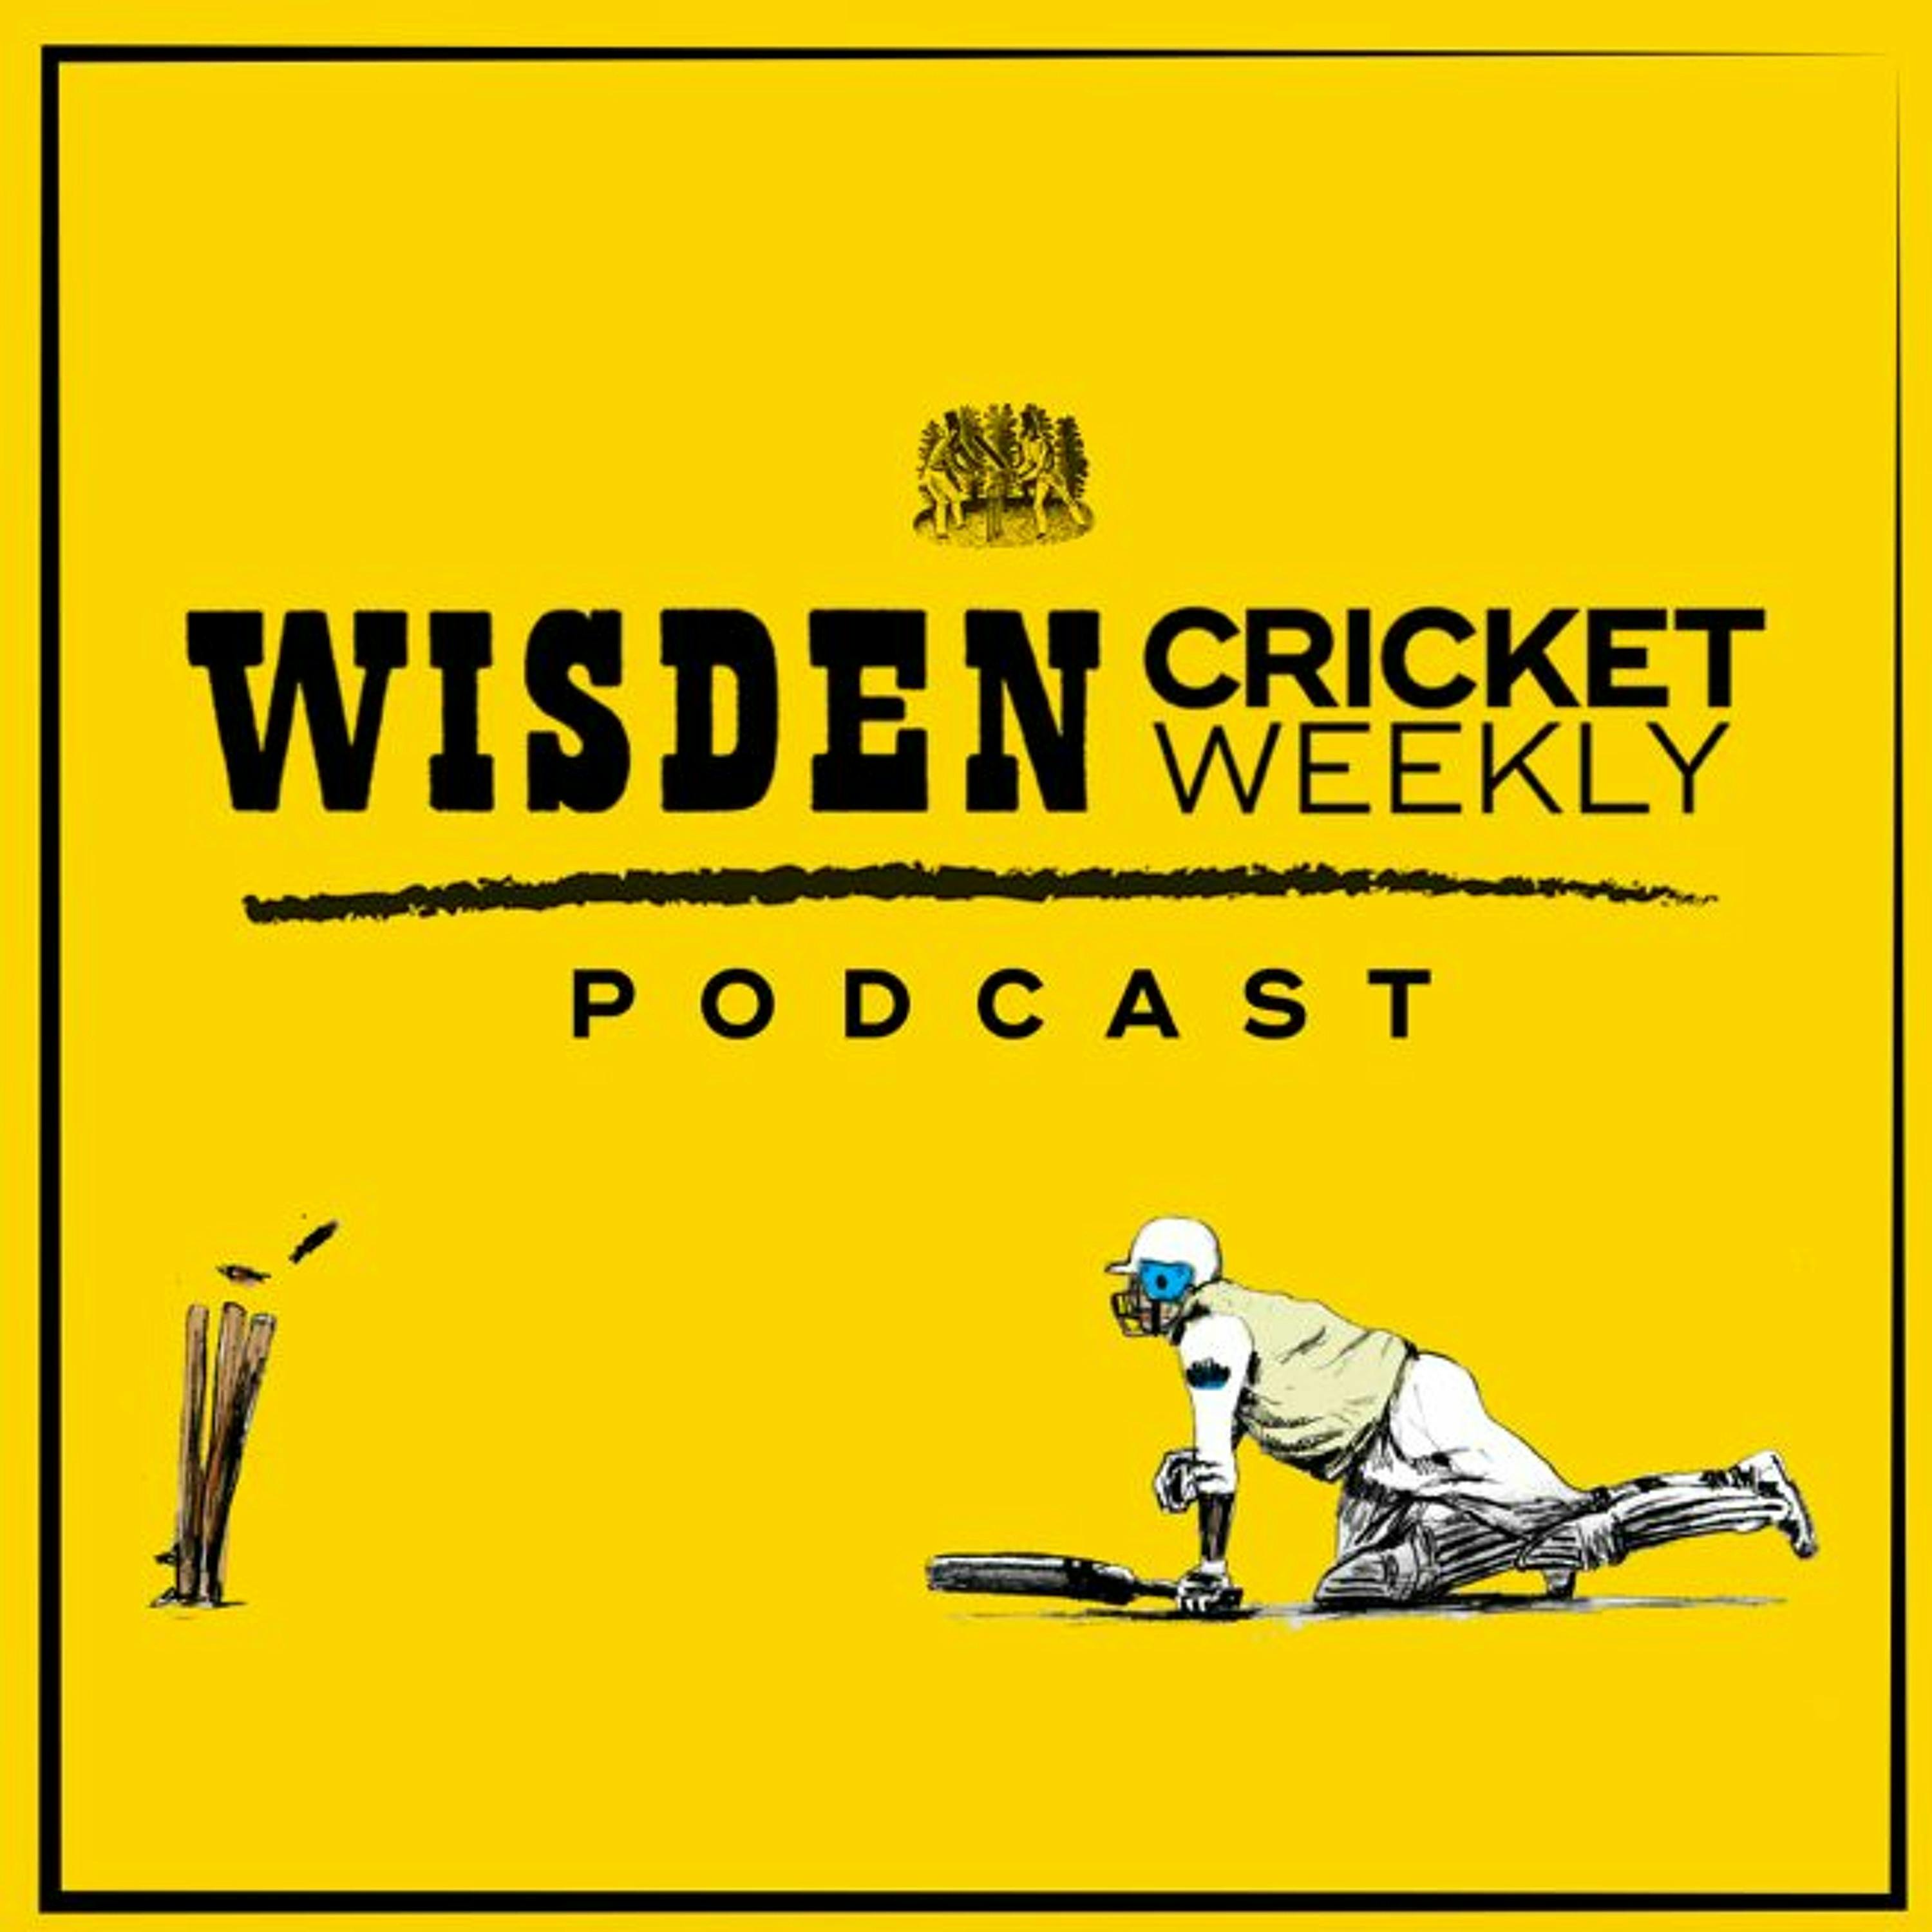 Emergency podcast: A look back at a chaotic two days of Test cricket